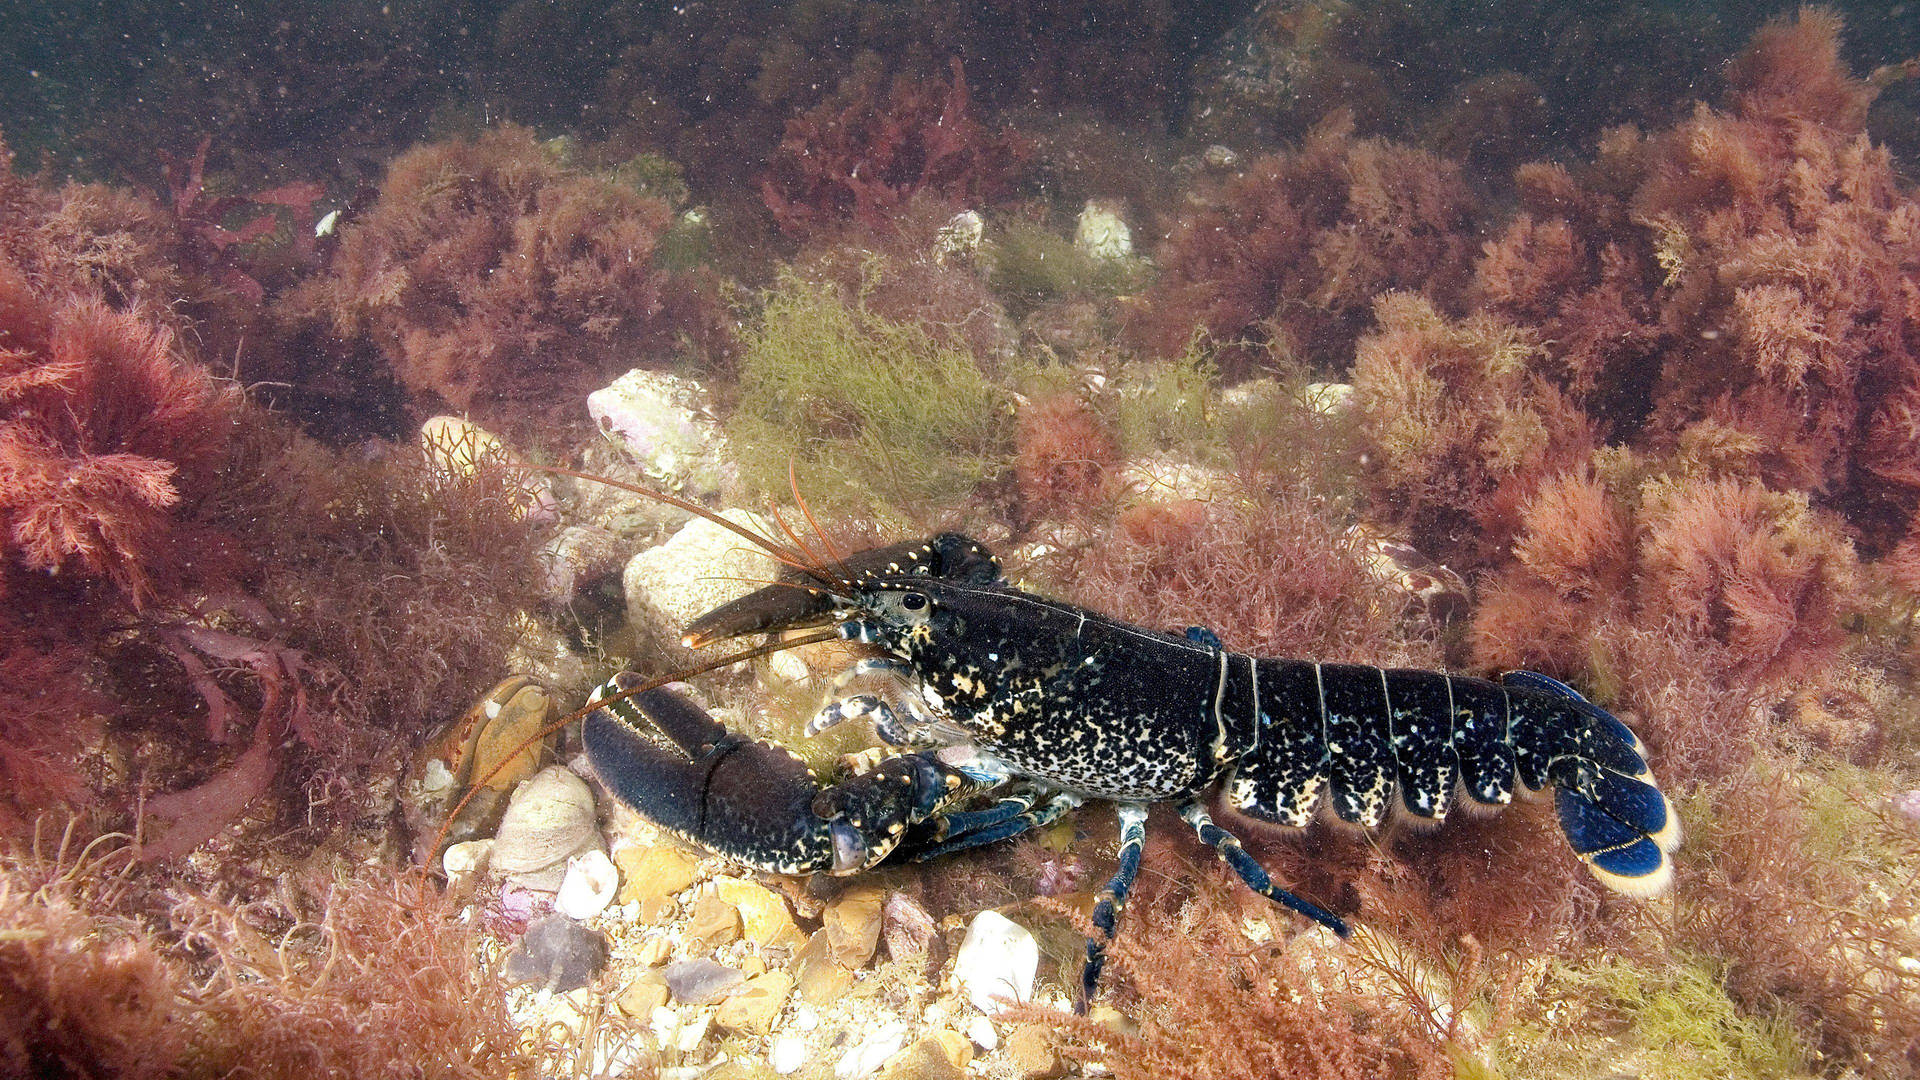 Lobster With Black Carapace